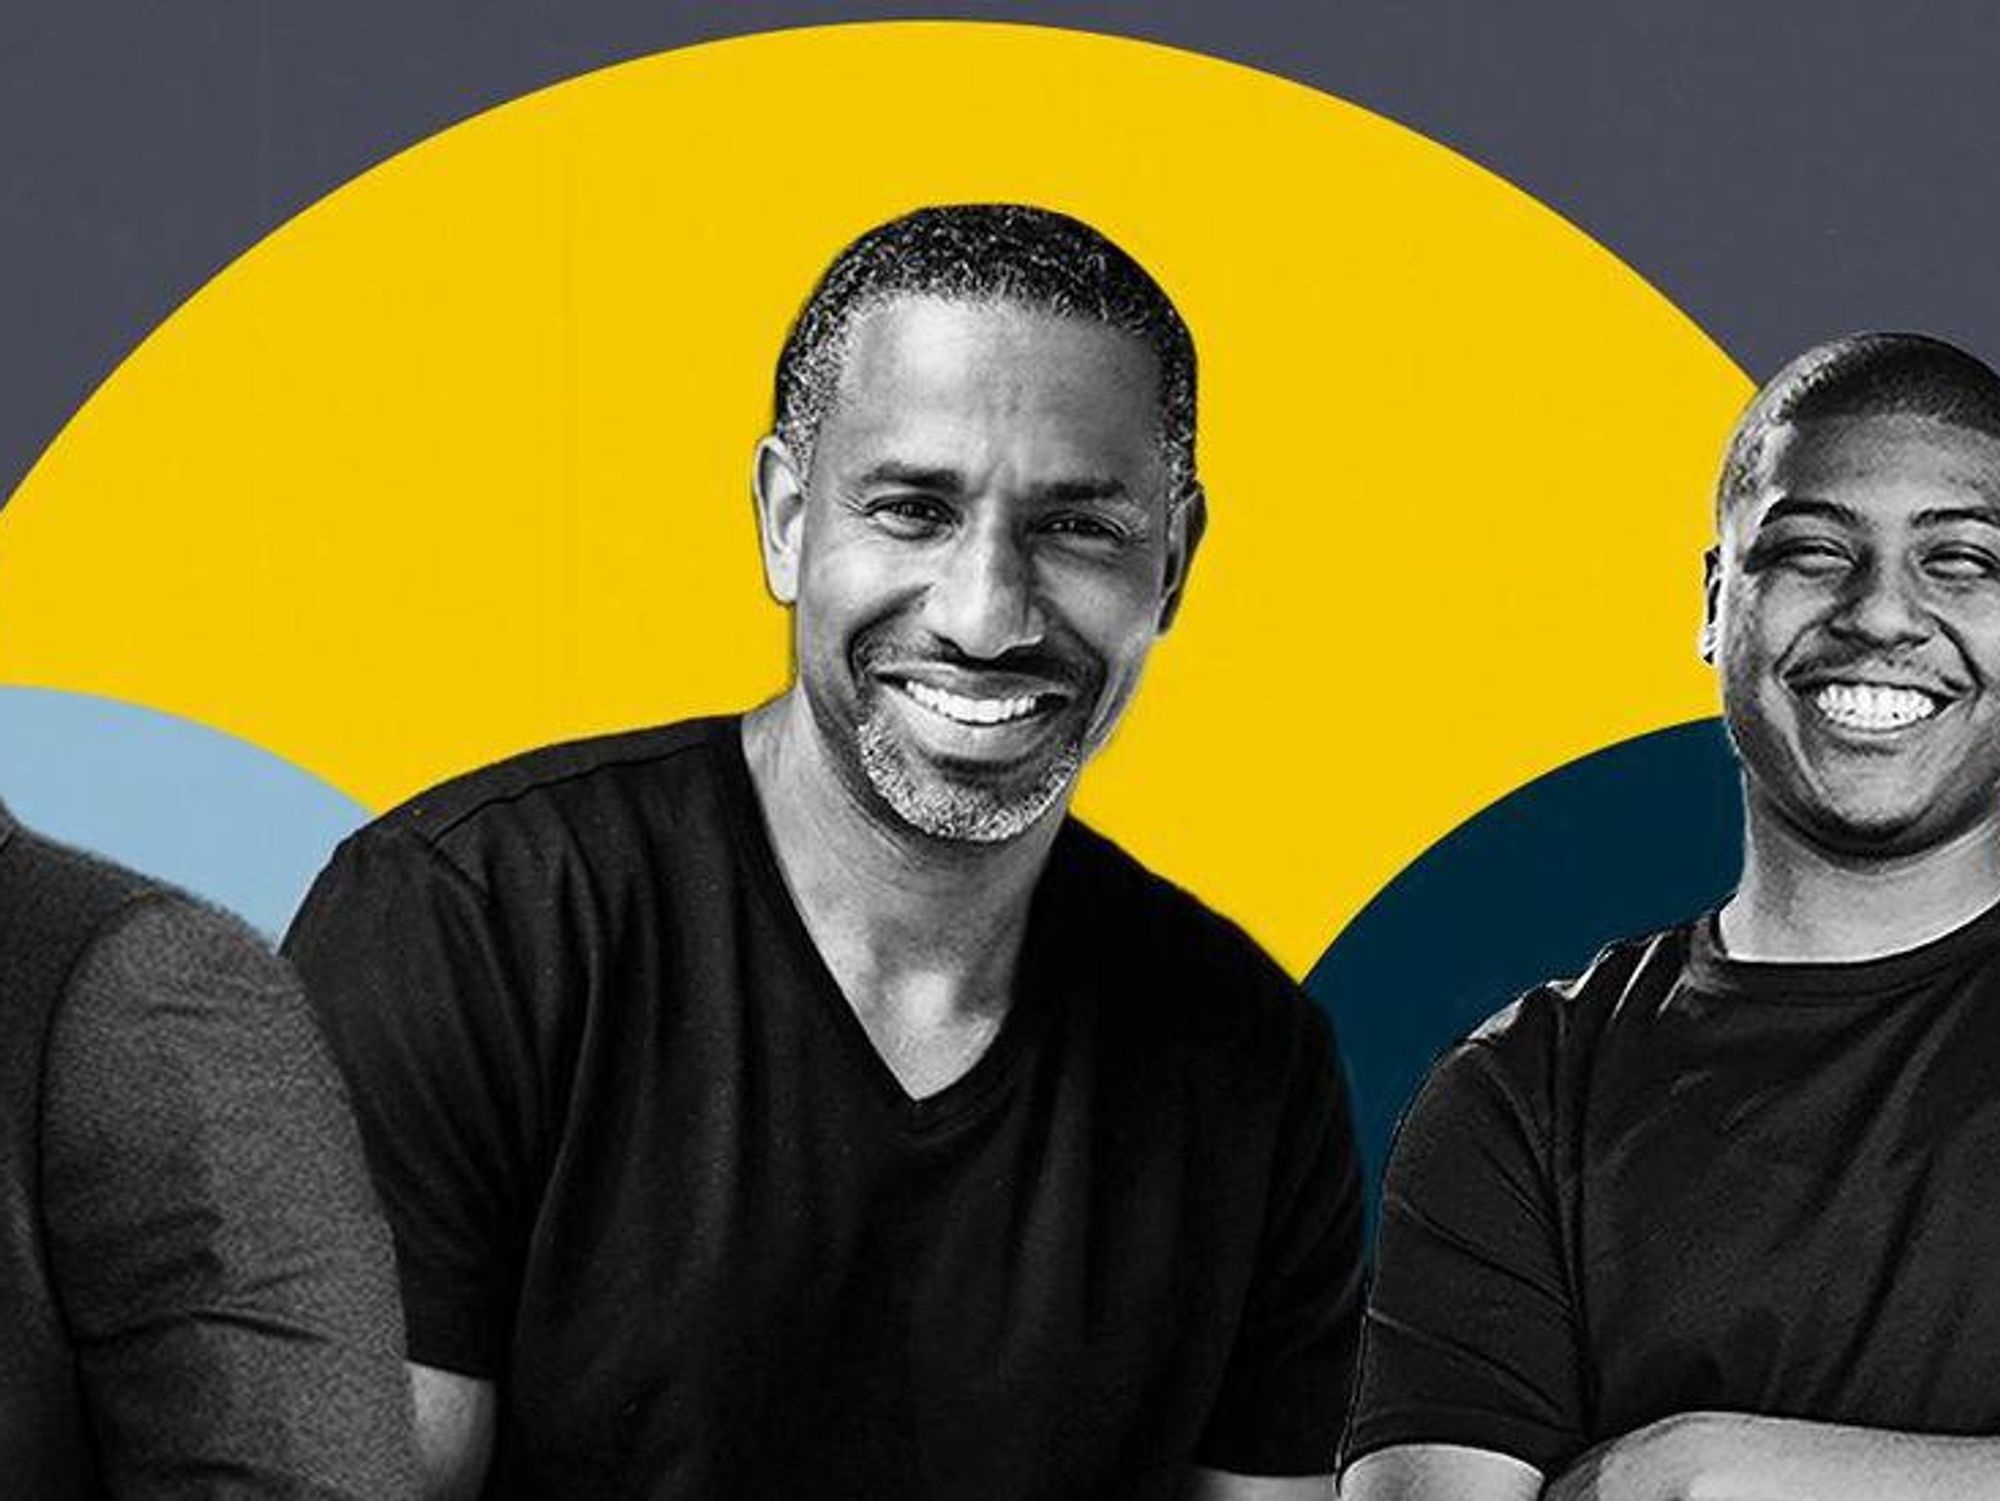 Weekly Round Up: LA's Black and Latino Founders to Follow